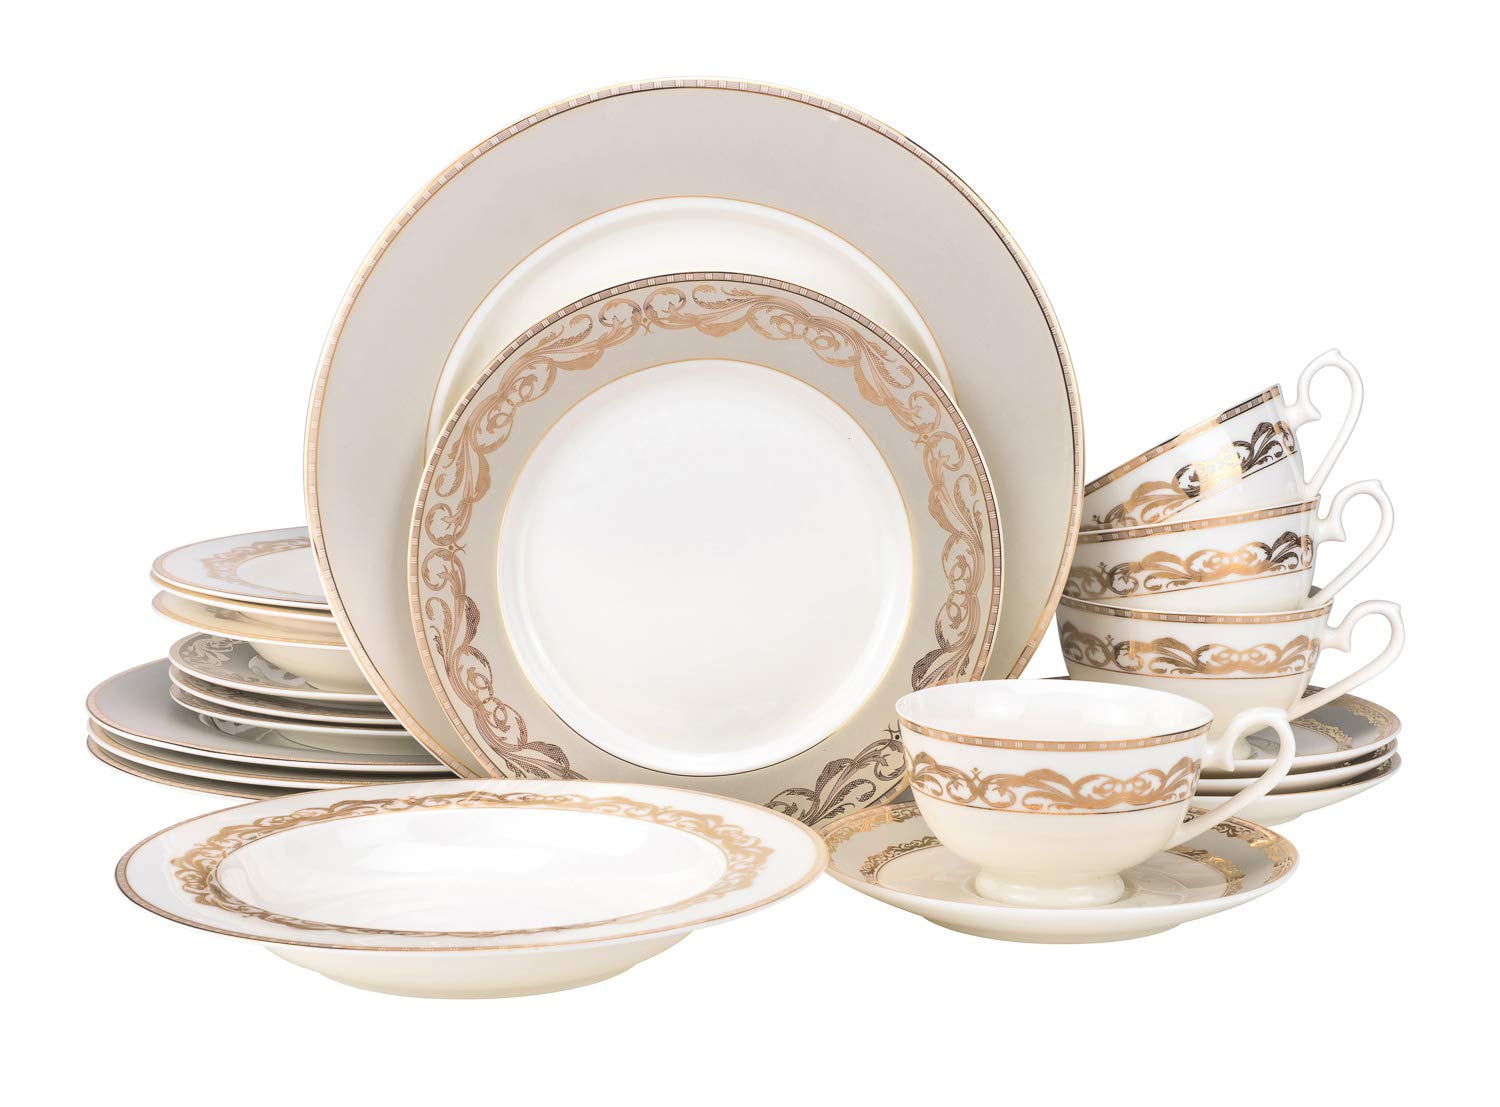 Bone China Dinnerware 20pc Set Service for 4 Dixie Gold Microwave Safe Elegant Giftware Dish Set Essential Home Everyday Living Display Decoration